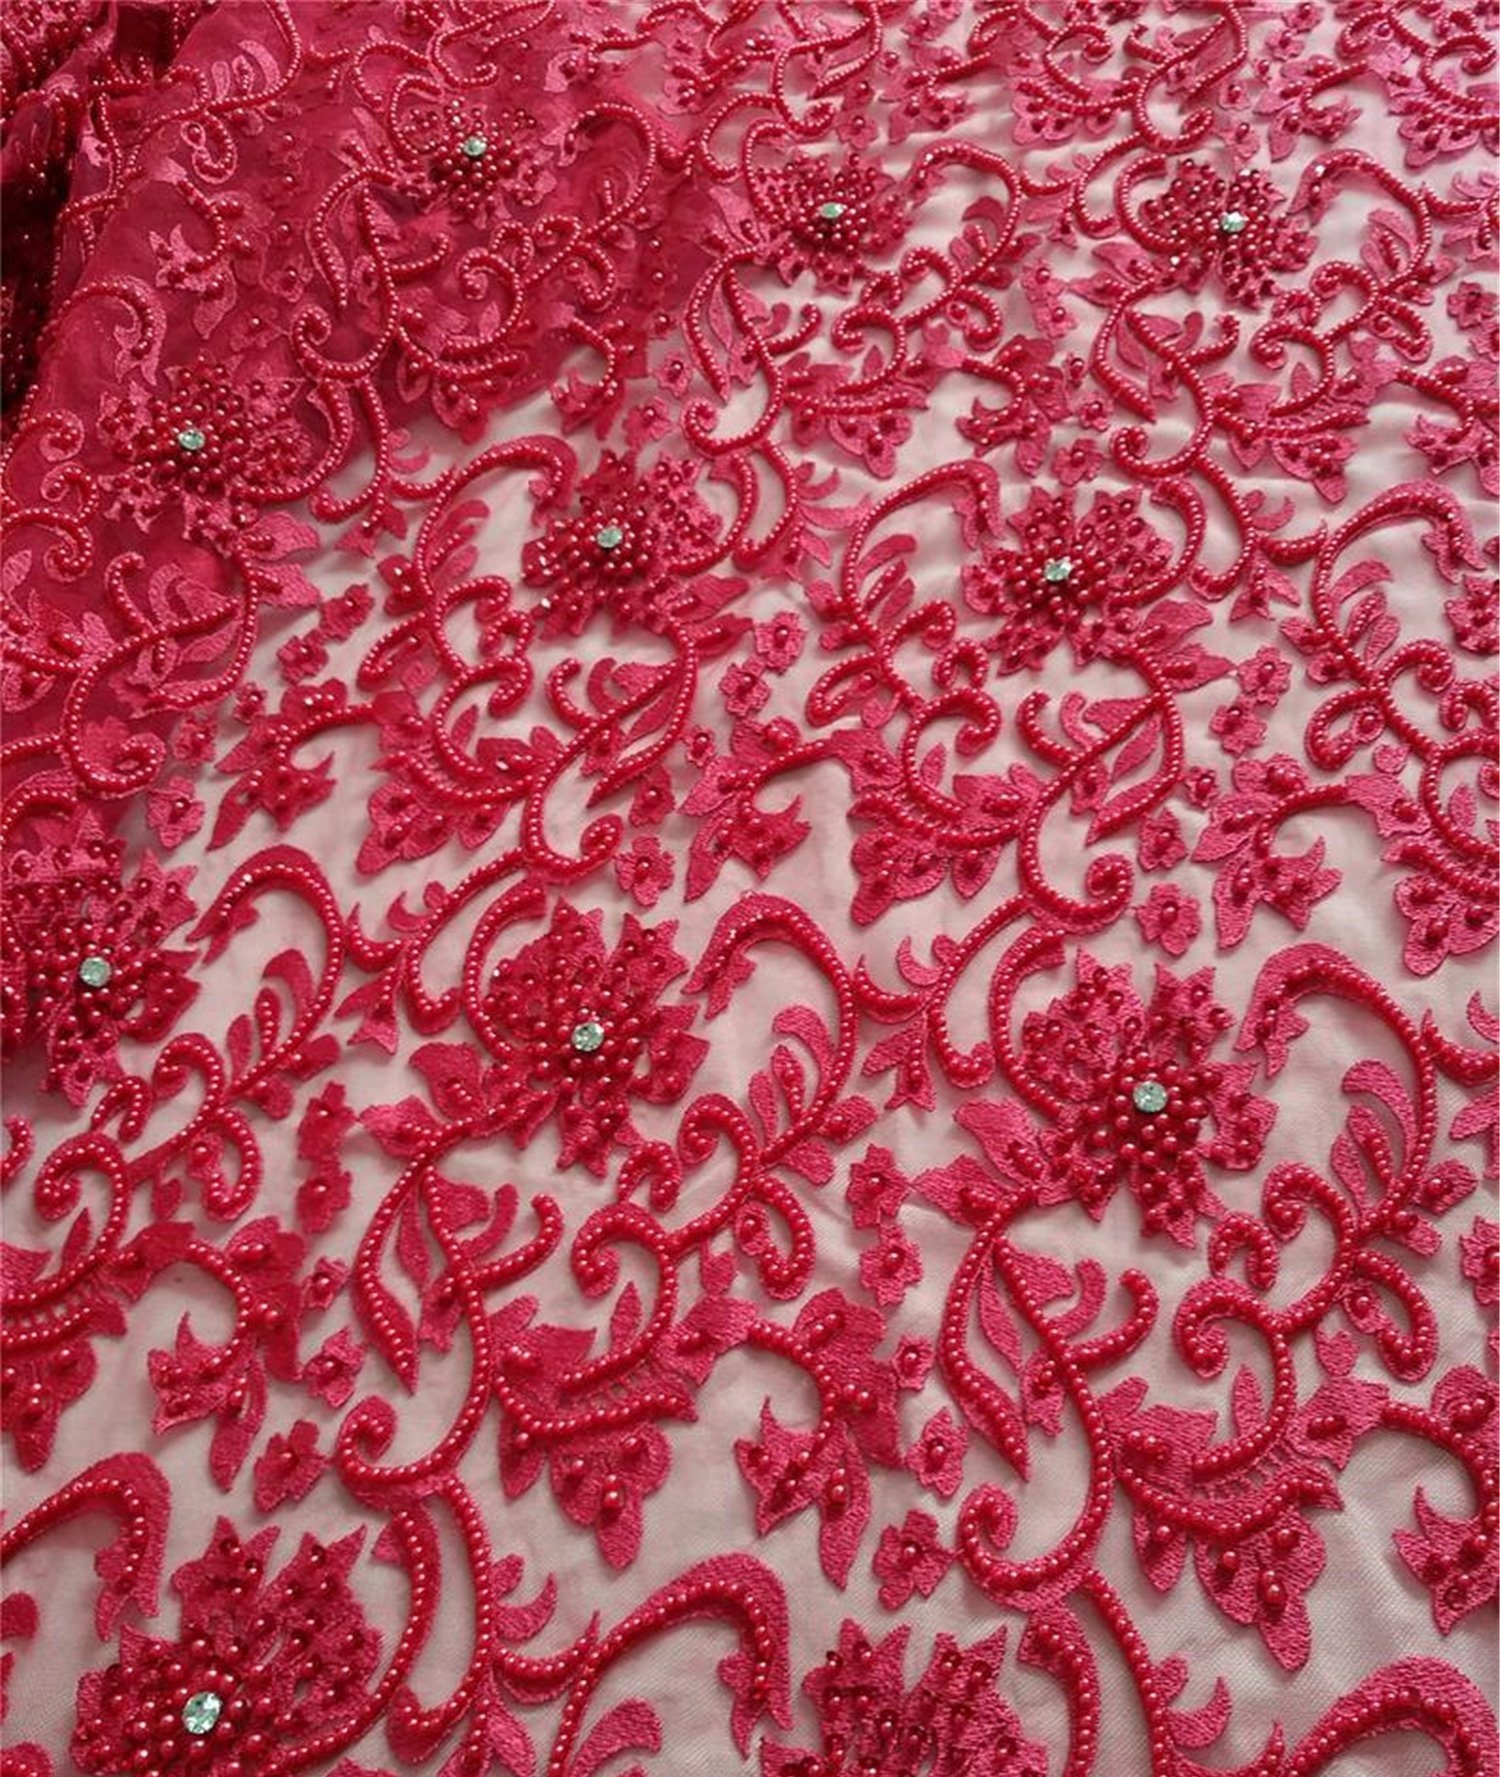 Red Beaded Embroidery Floral Lace Guipure Lace Fabric Alencon - Etsy